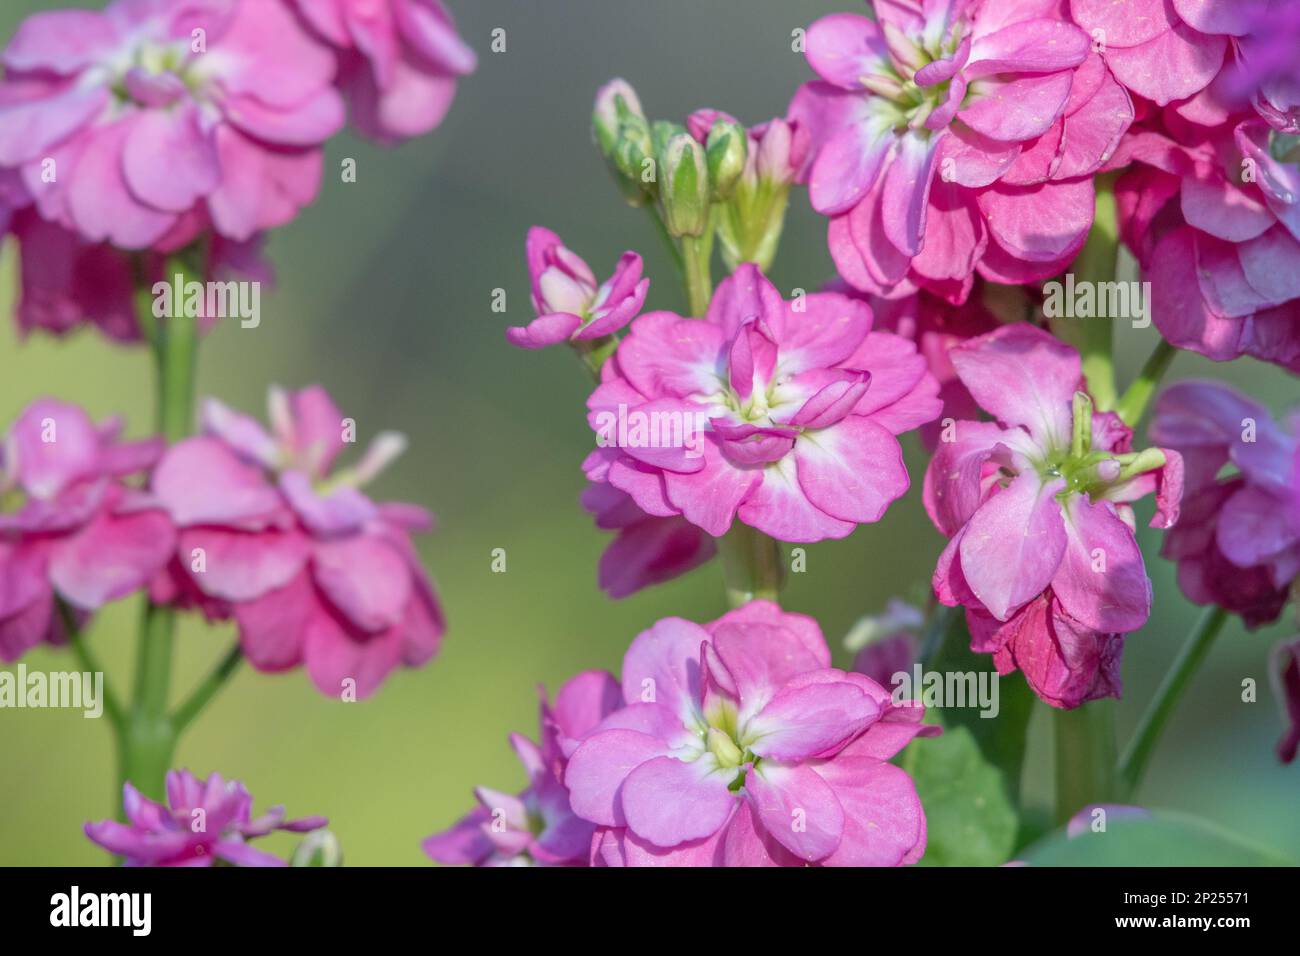 Delicate pink flower petals of Matthiola incana on a late afternoon in springtime. Stock Photo